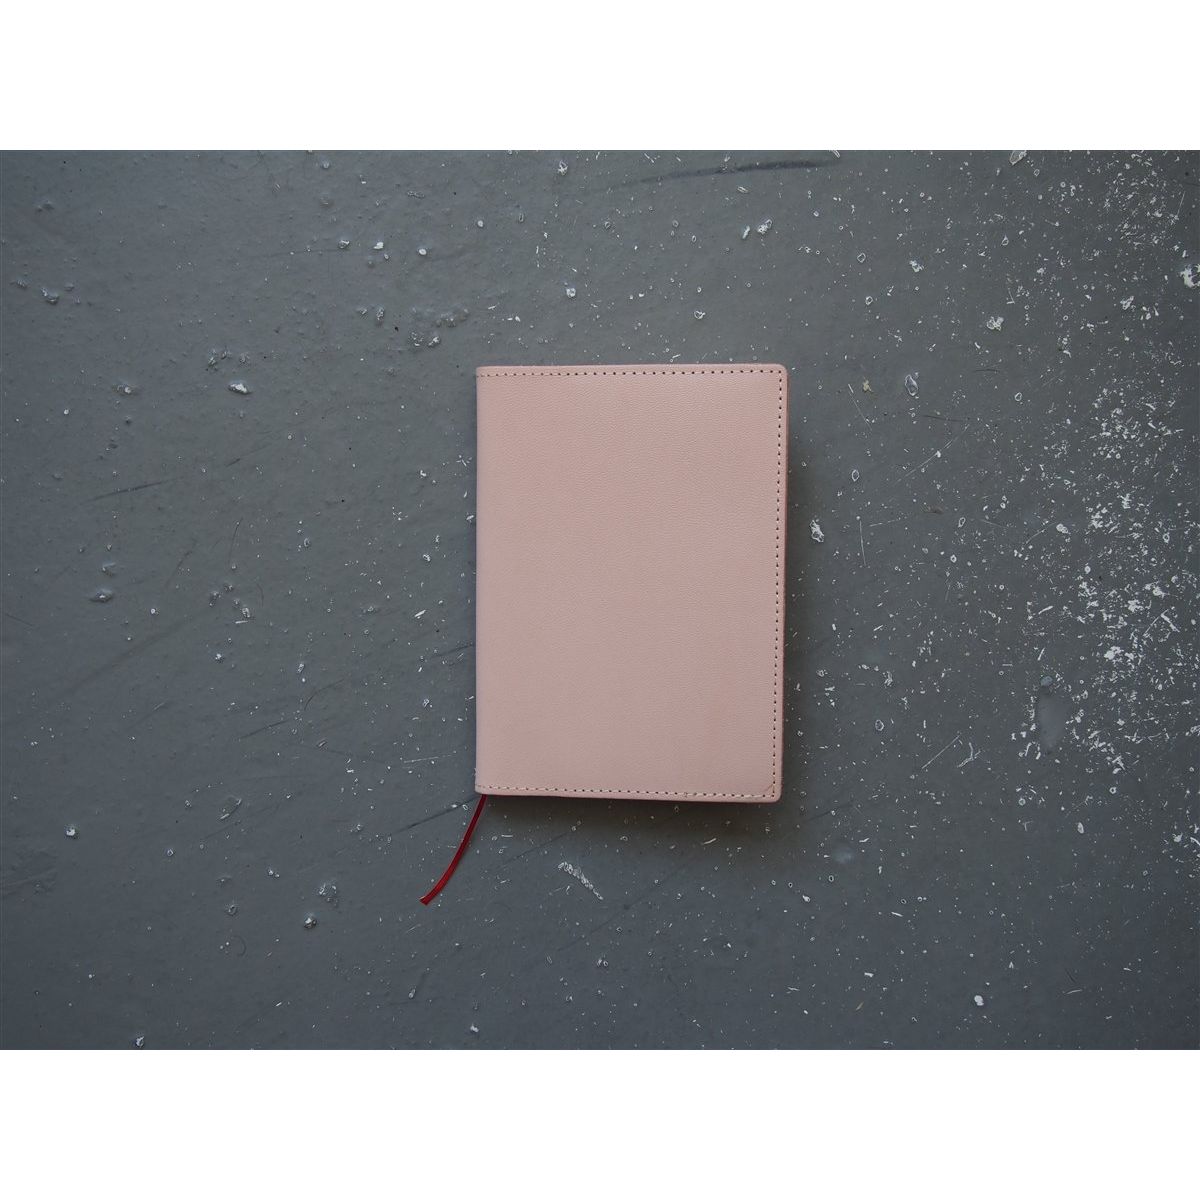 Midori MD Notebook Cover - Goat Leather - A6